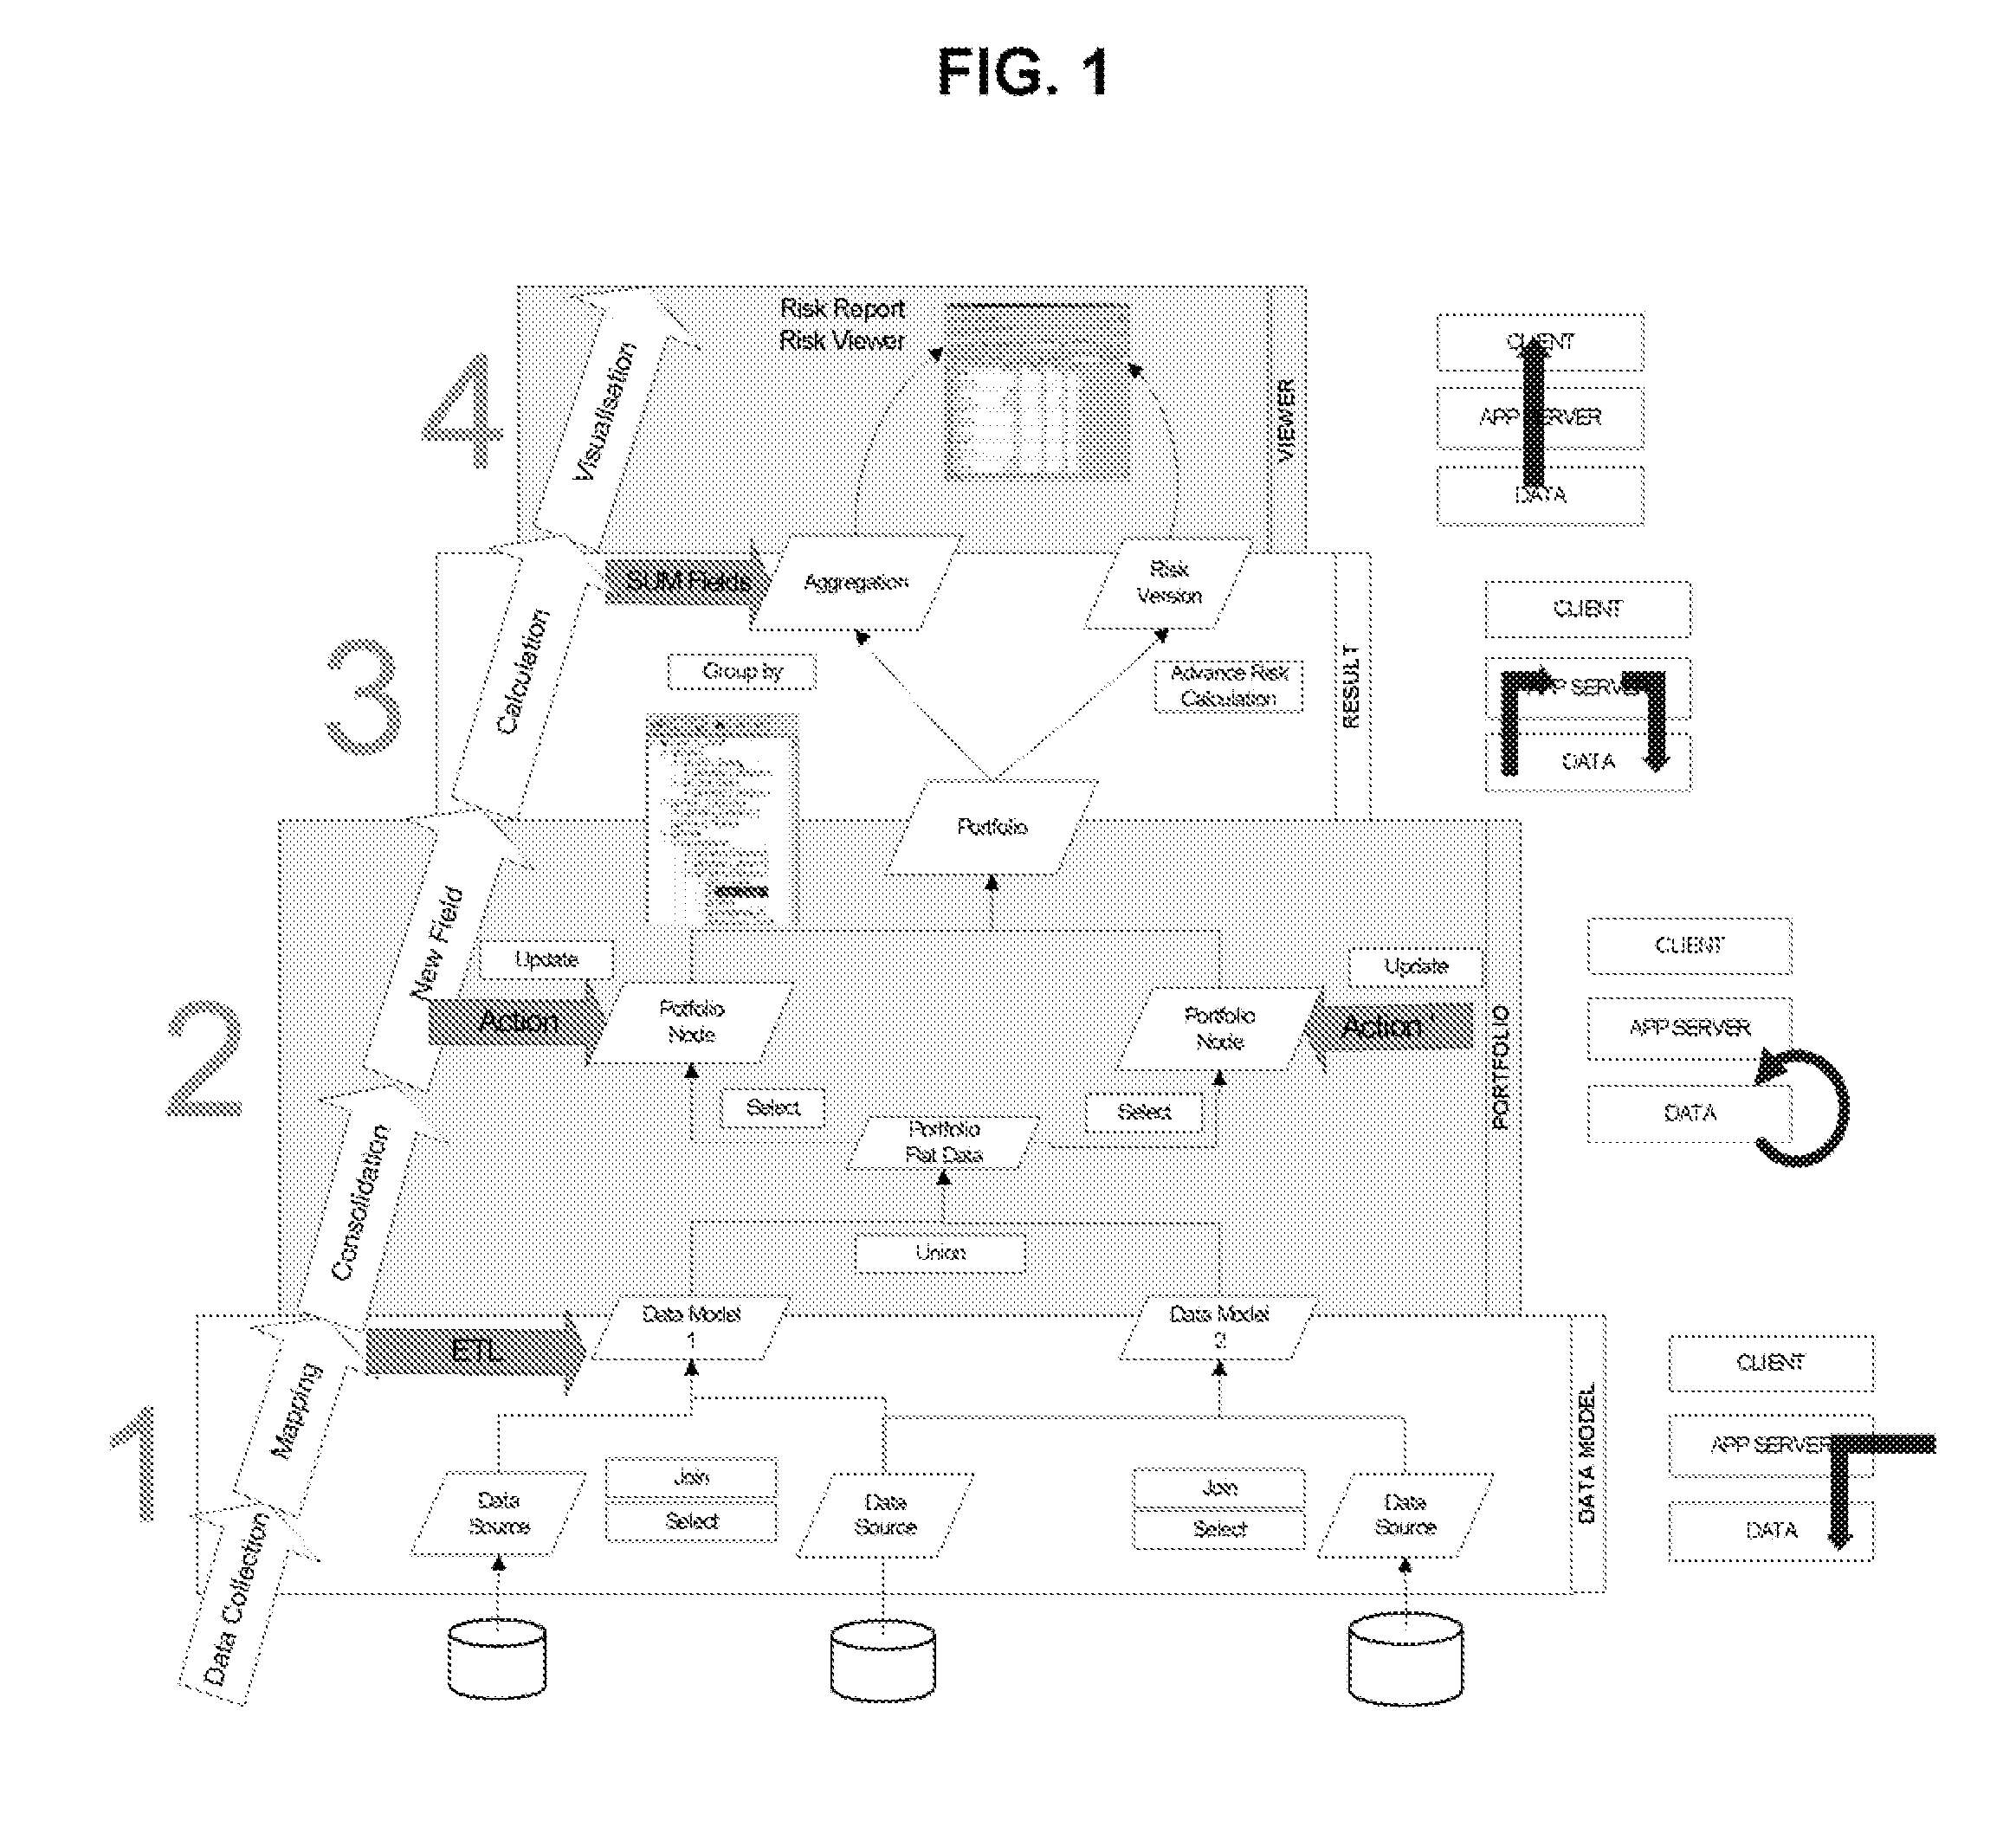 System and Method For Dynamically Utilizing and Managing Financial, Operational, and Compliance Data